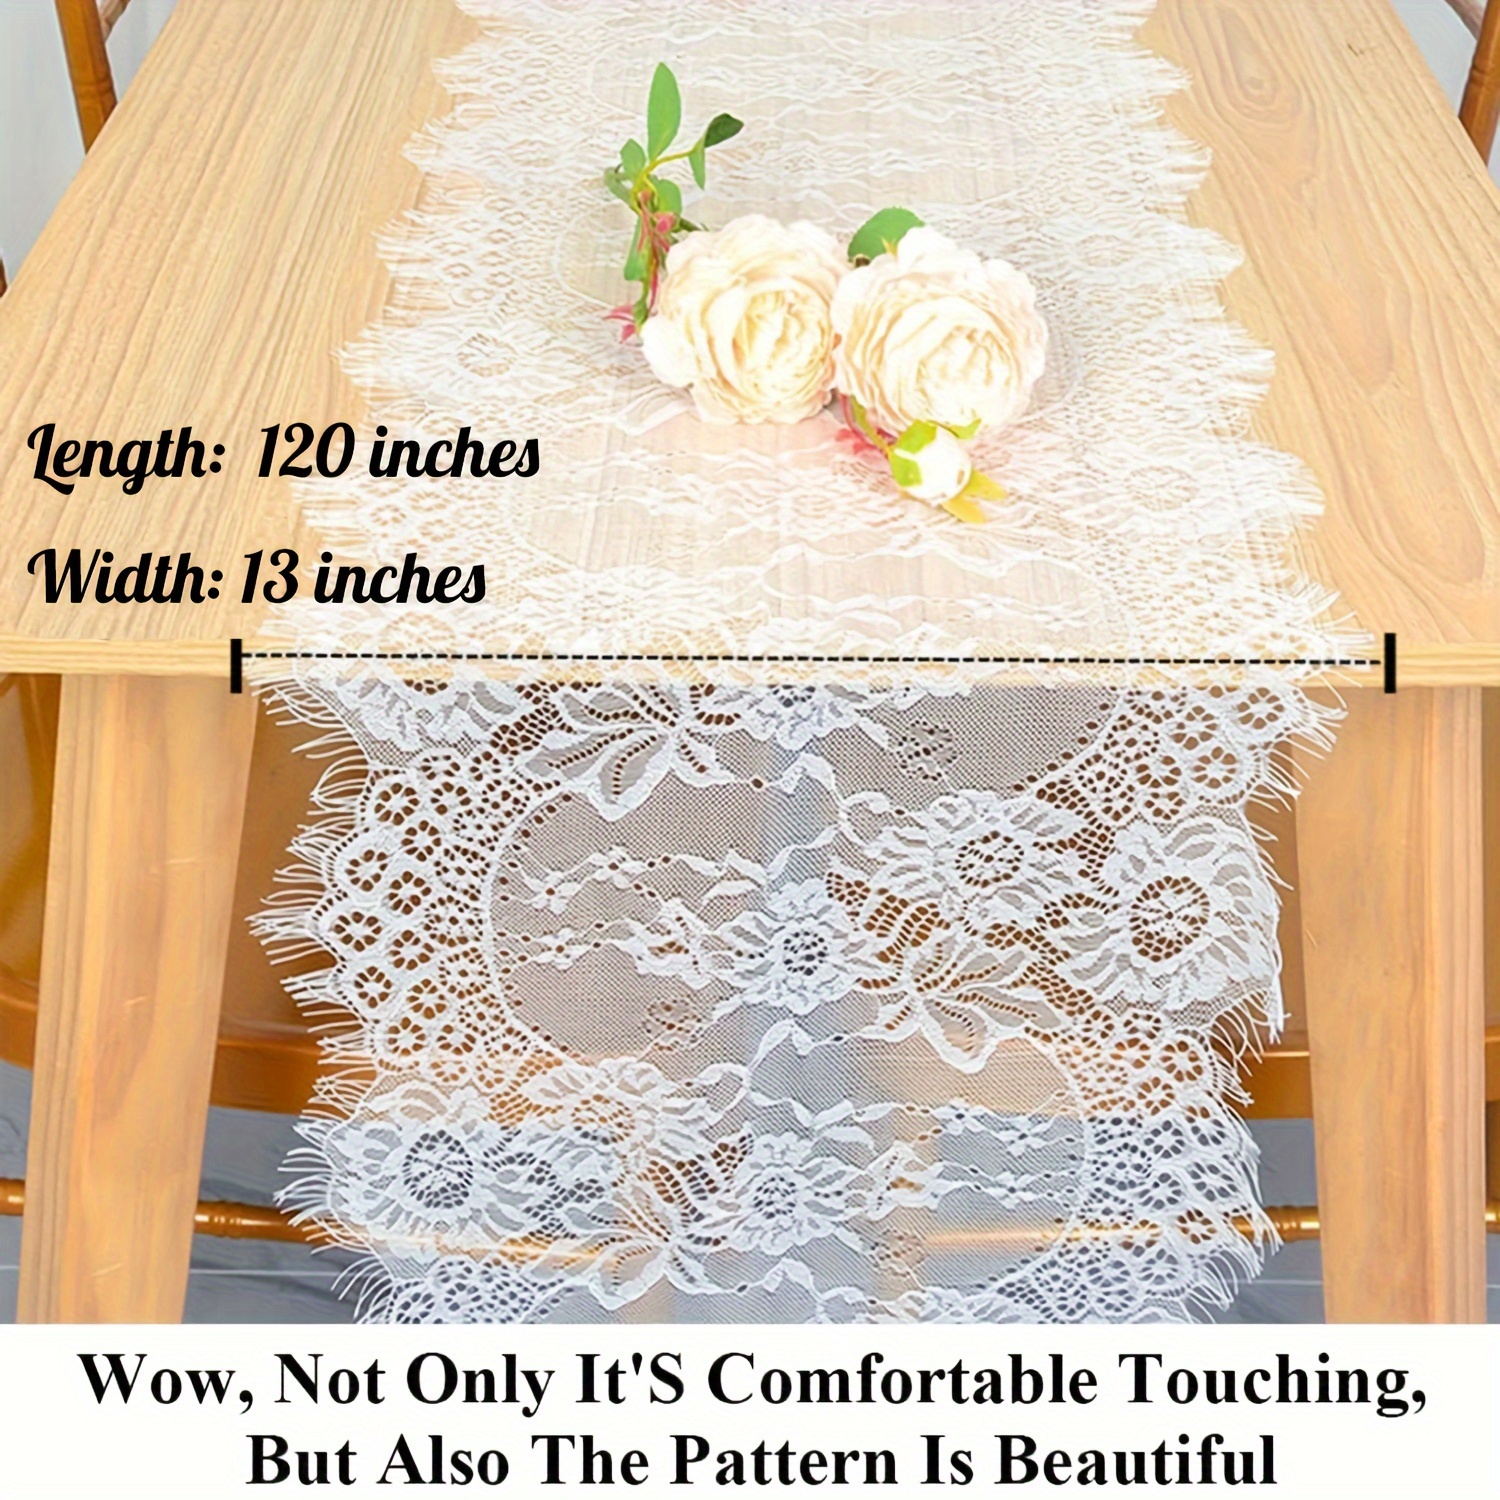 HEIPINIUYE 6 Pcs White Lace Table Runner 14 x 120 inch Embroidered Boho Table Runner for Wedding Party Bridal Shower Decorations Vintage RU